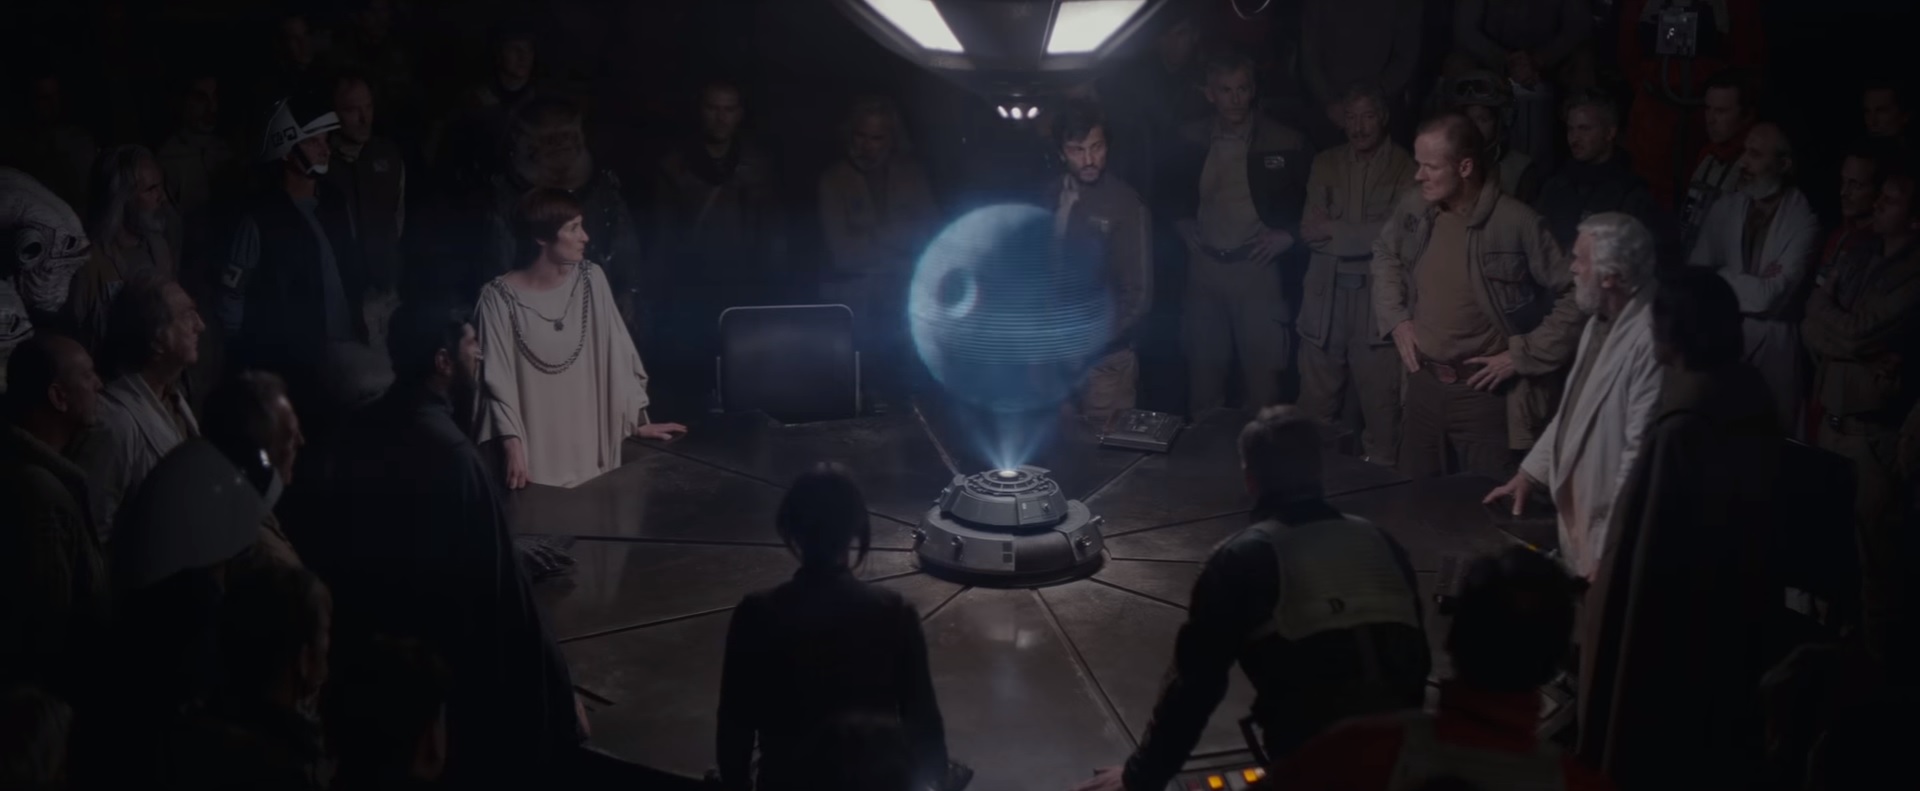 rogue-one-a-star-wars-story-trailer-3-rebel-council